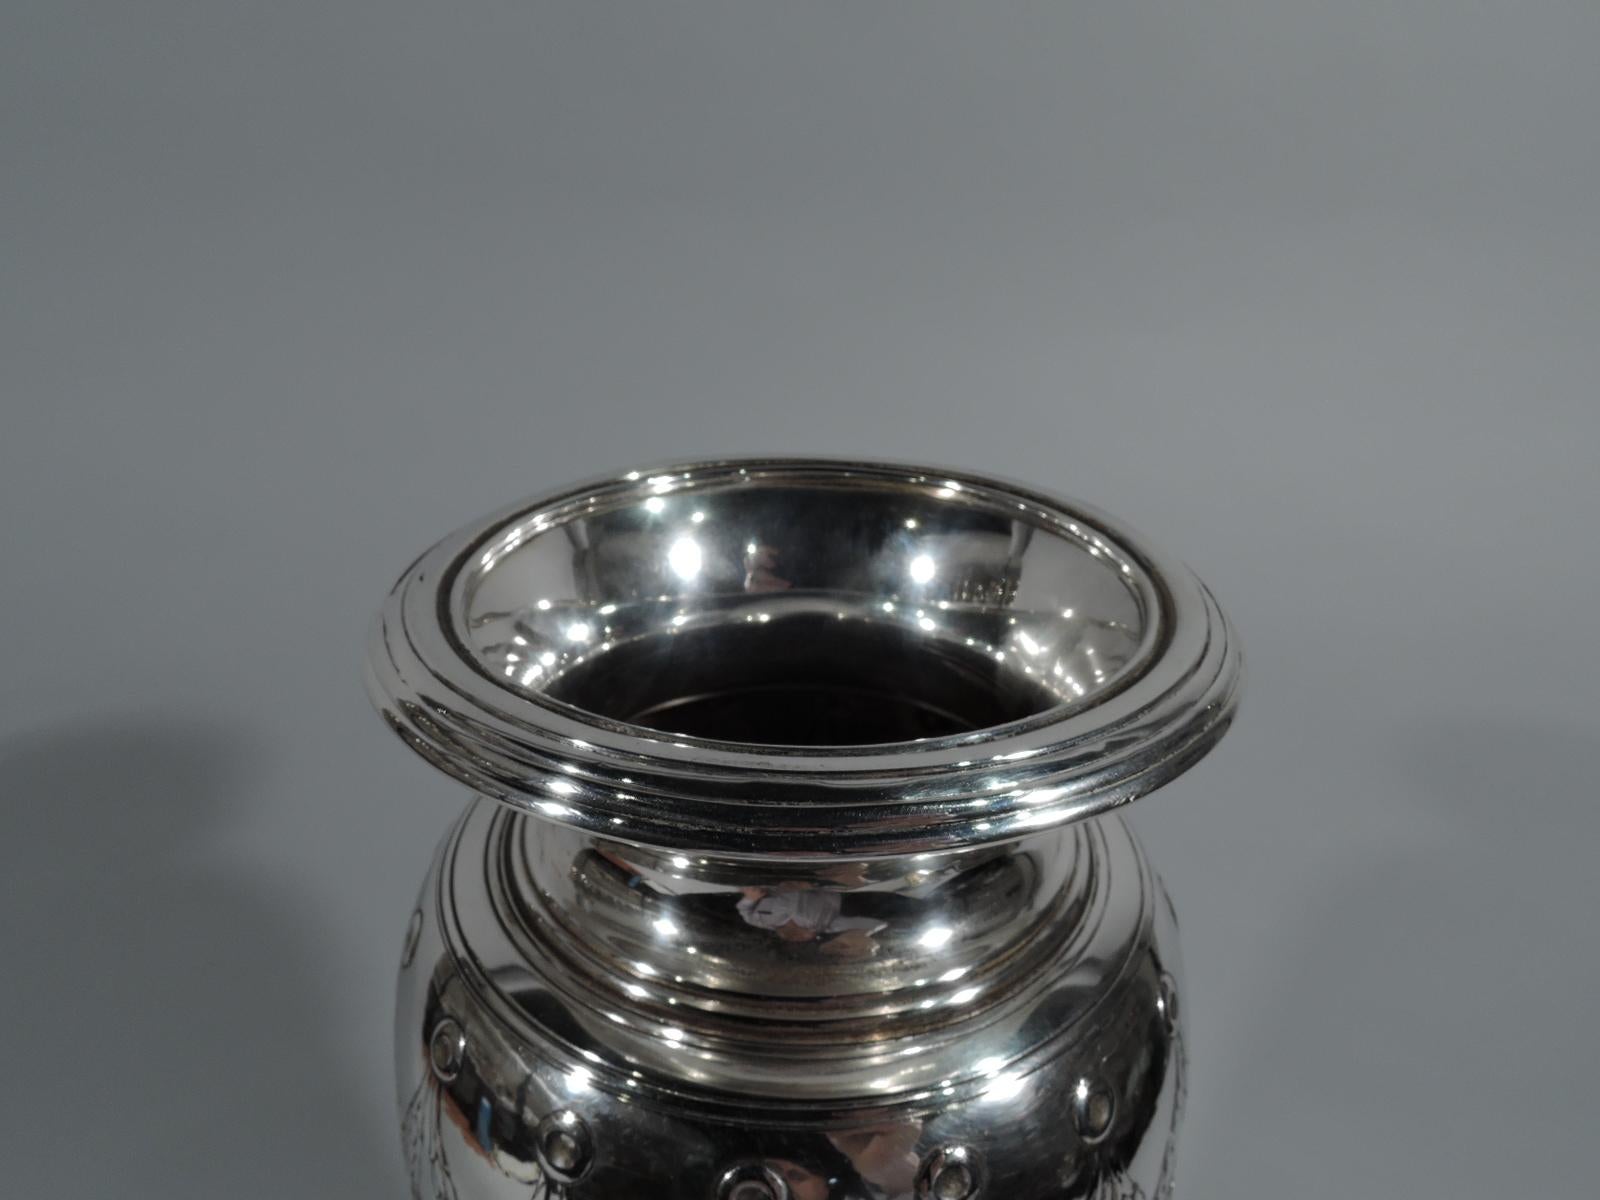 Tall Art Deco sterling silver vase. Made by Tiffany & Co. in New York, circa 1920. Ovoid with short neck and slightly turned-down rim, and stepped foot. Modern Classical ornament with chased pendant swags and scrollwork as well as reeding and